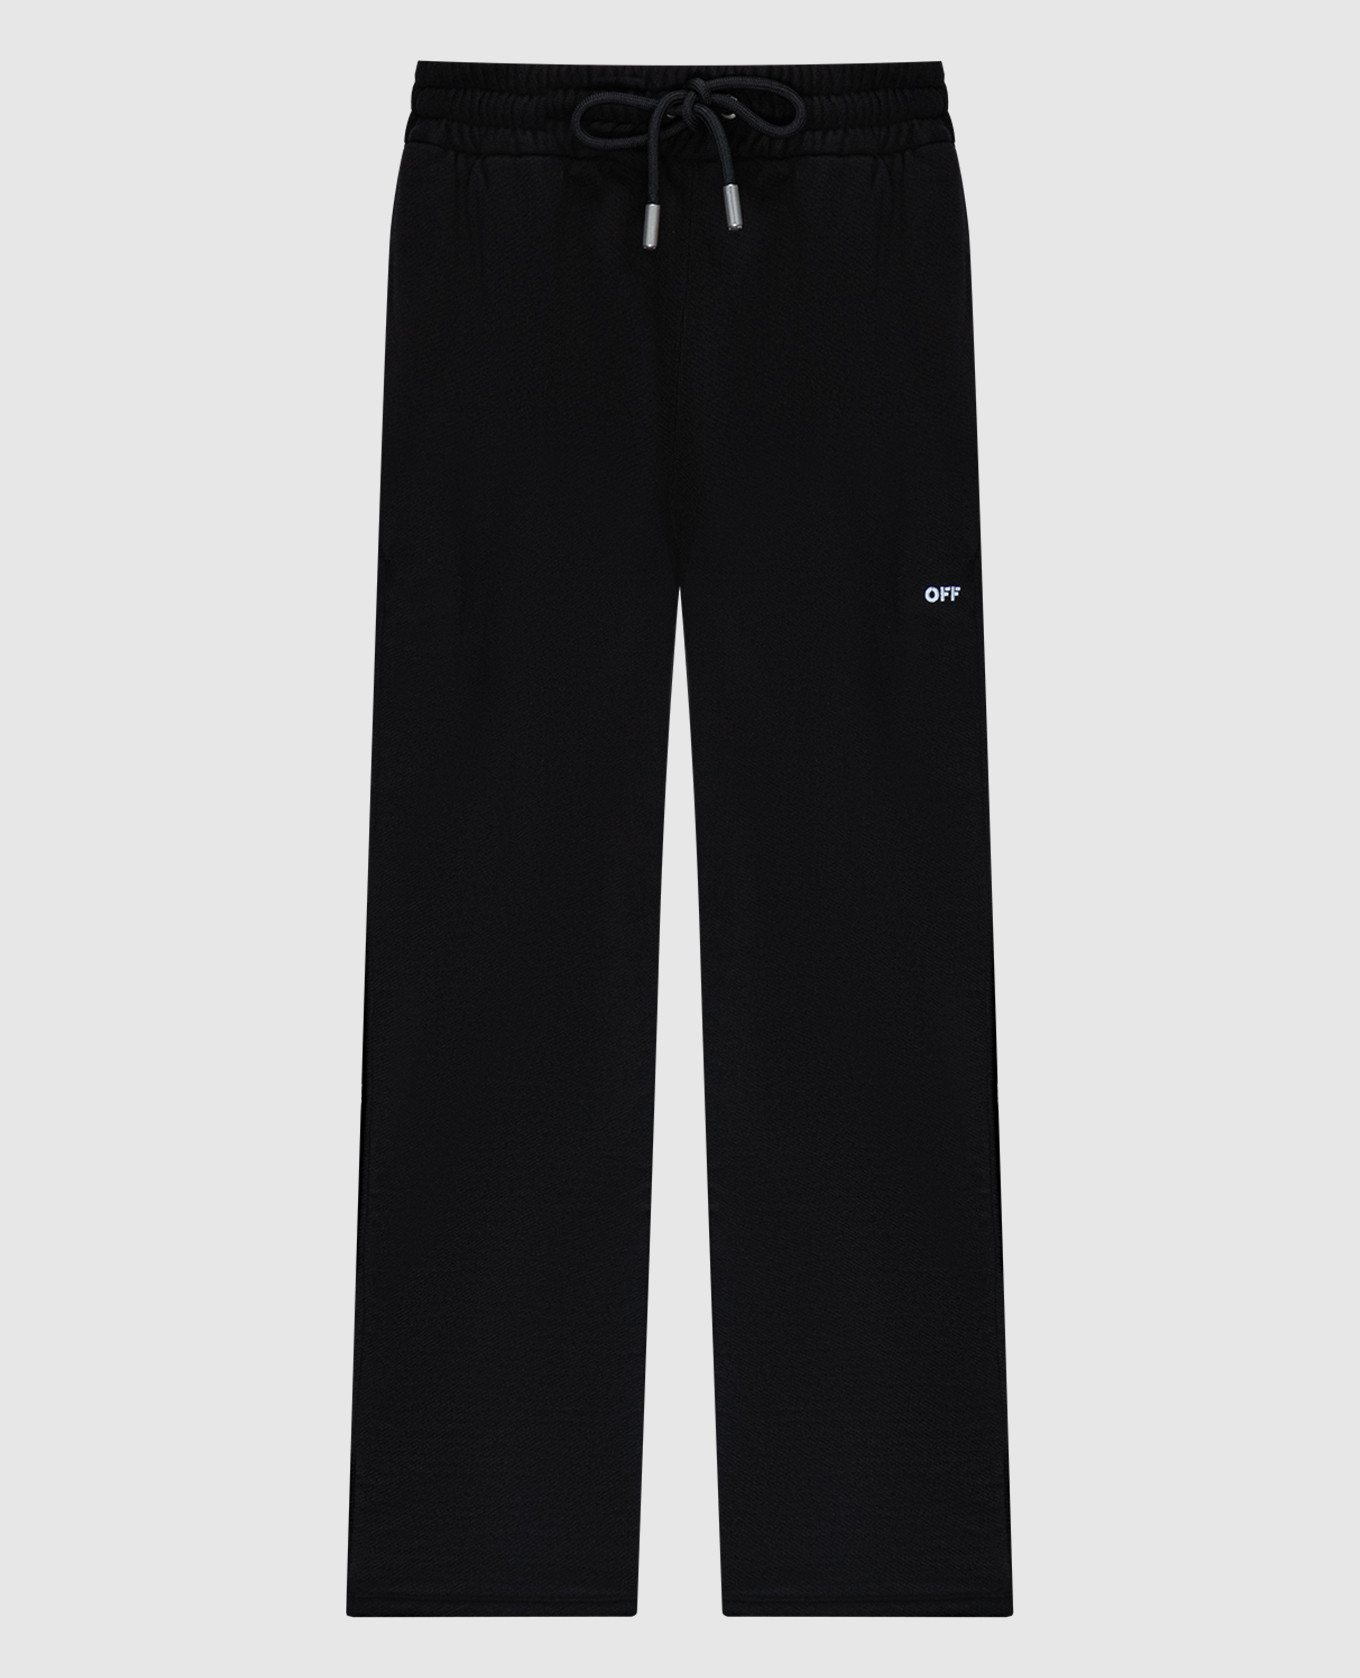 Black sweatpants with contrasting logo embroidery